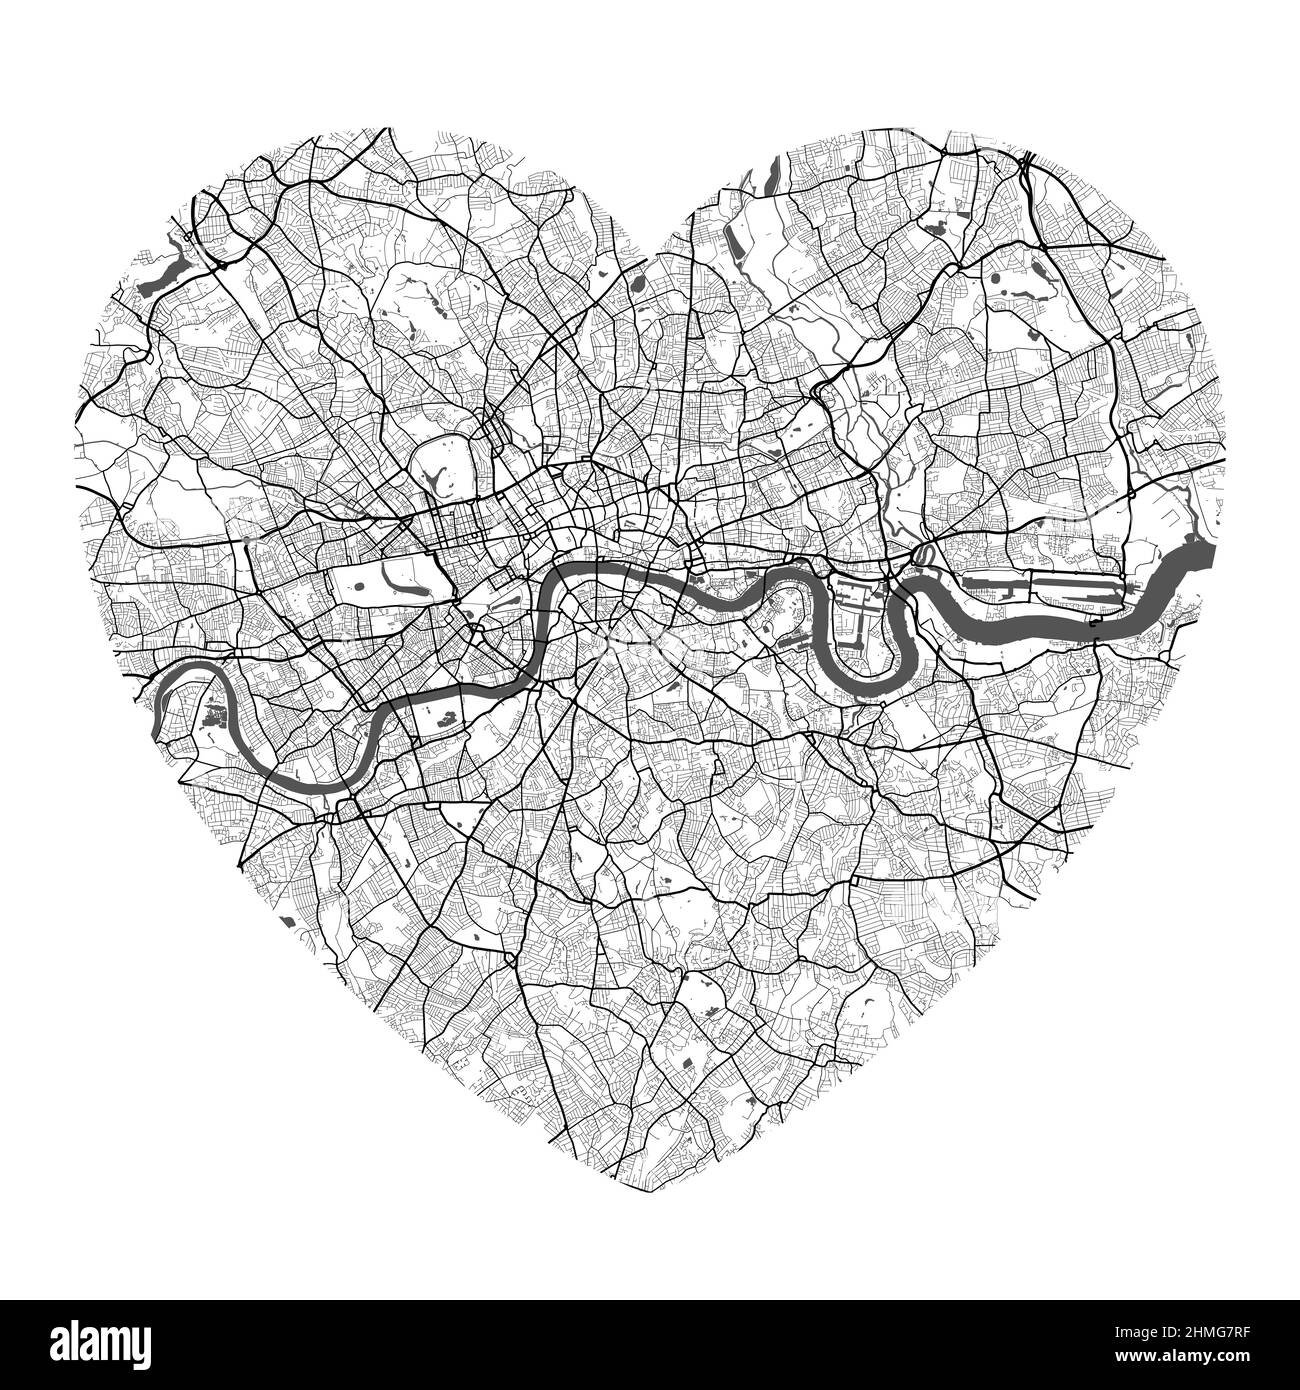 Heart shaped London city vector map. Black and white colors illustration. Roads, streets, rivers. Stock Vector